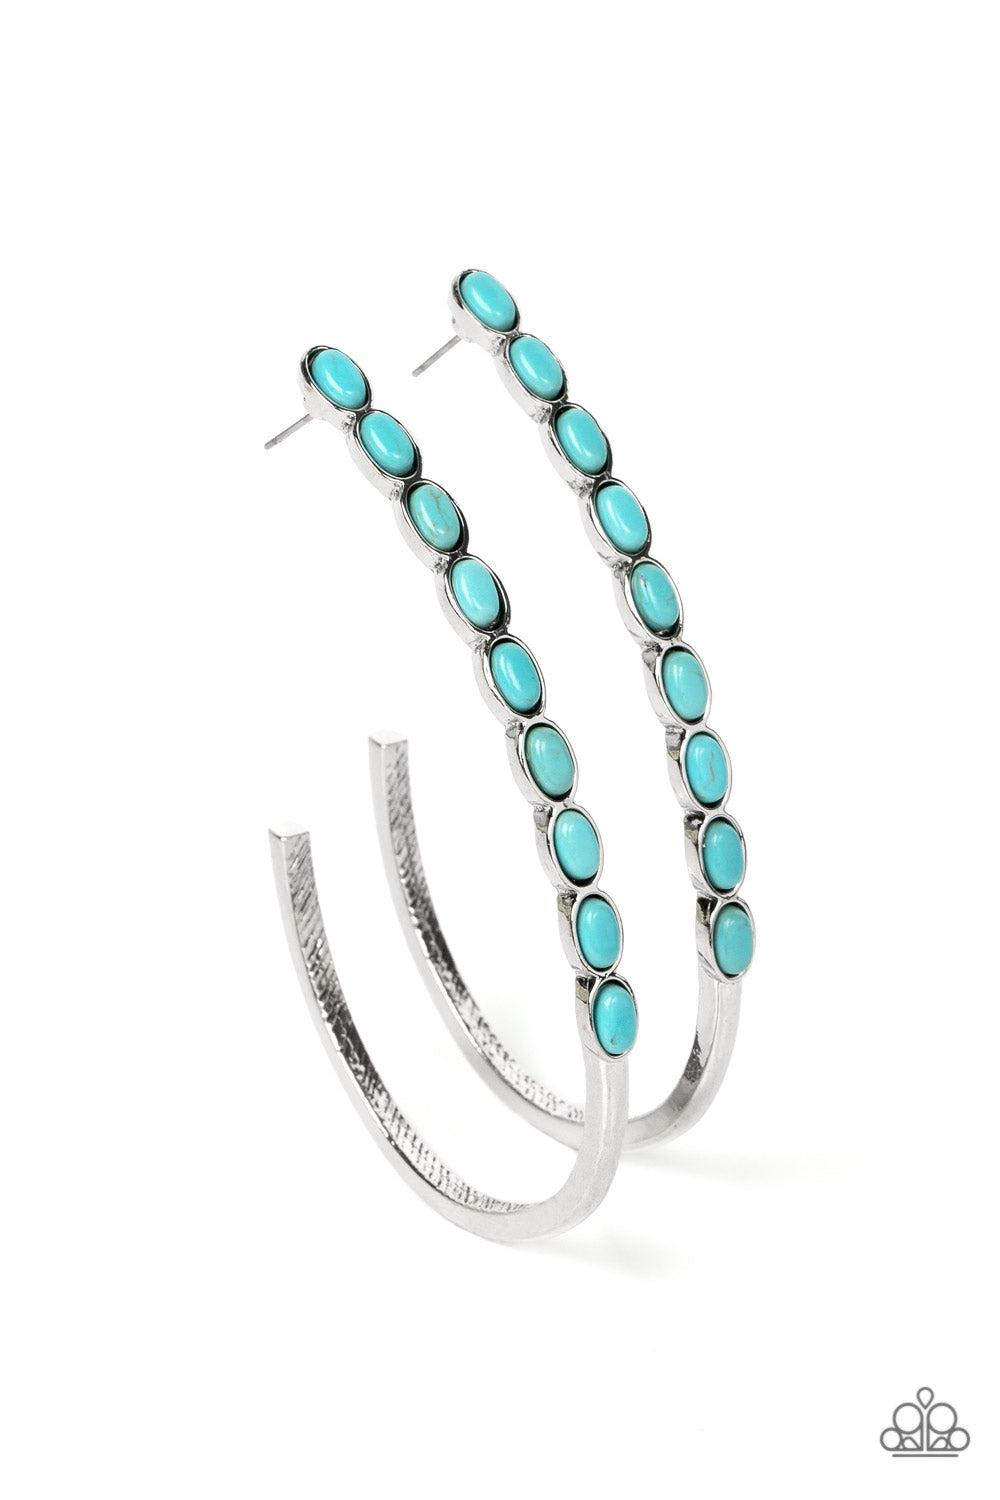 Artisan Soul Turquoise Blue Stone Hoop Earrings - Paparazzi Accessories- lightbox - CarasShop.com - $5 Jewelry by Cara Jewels